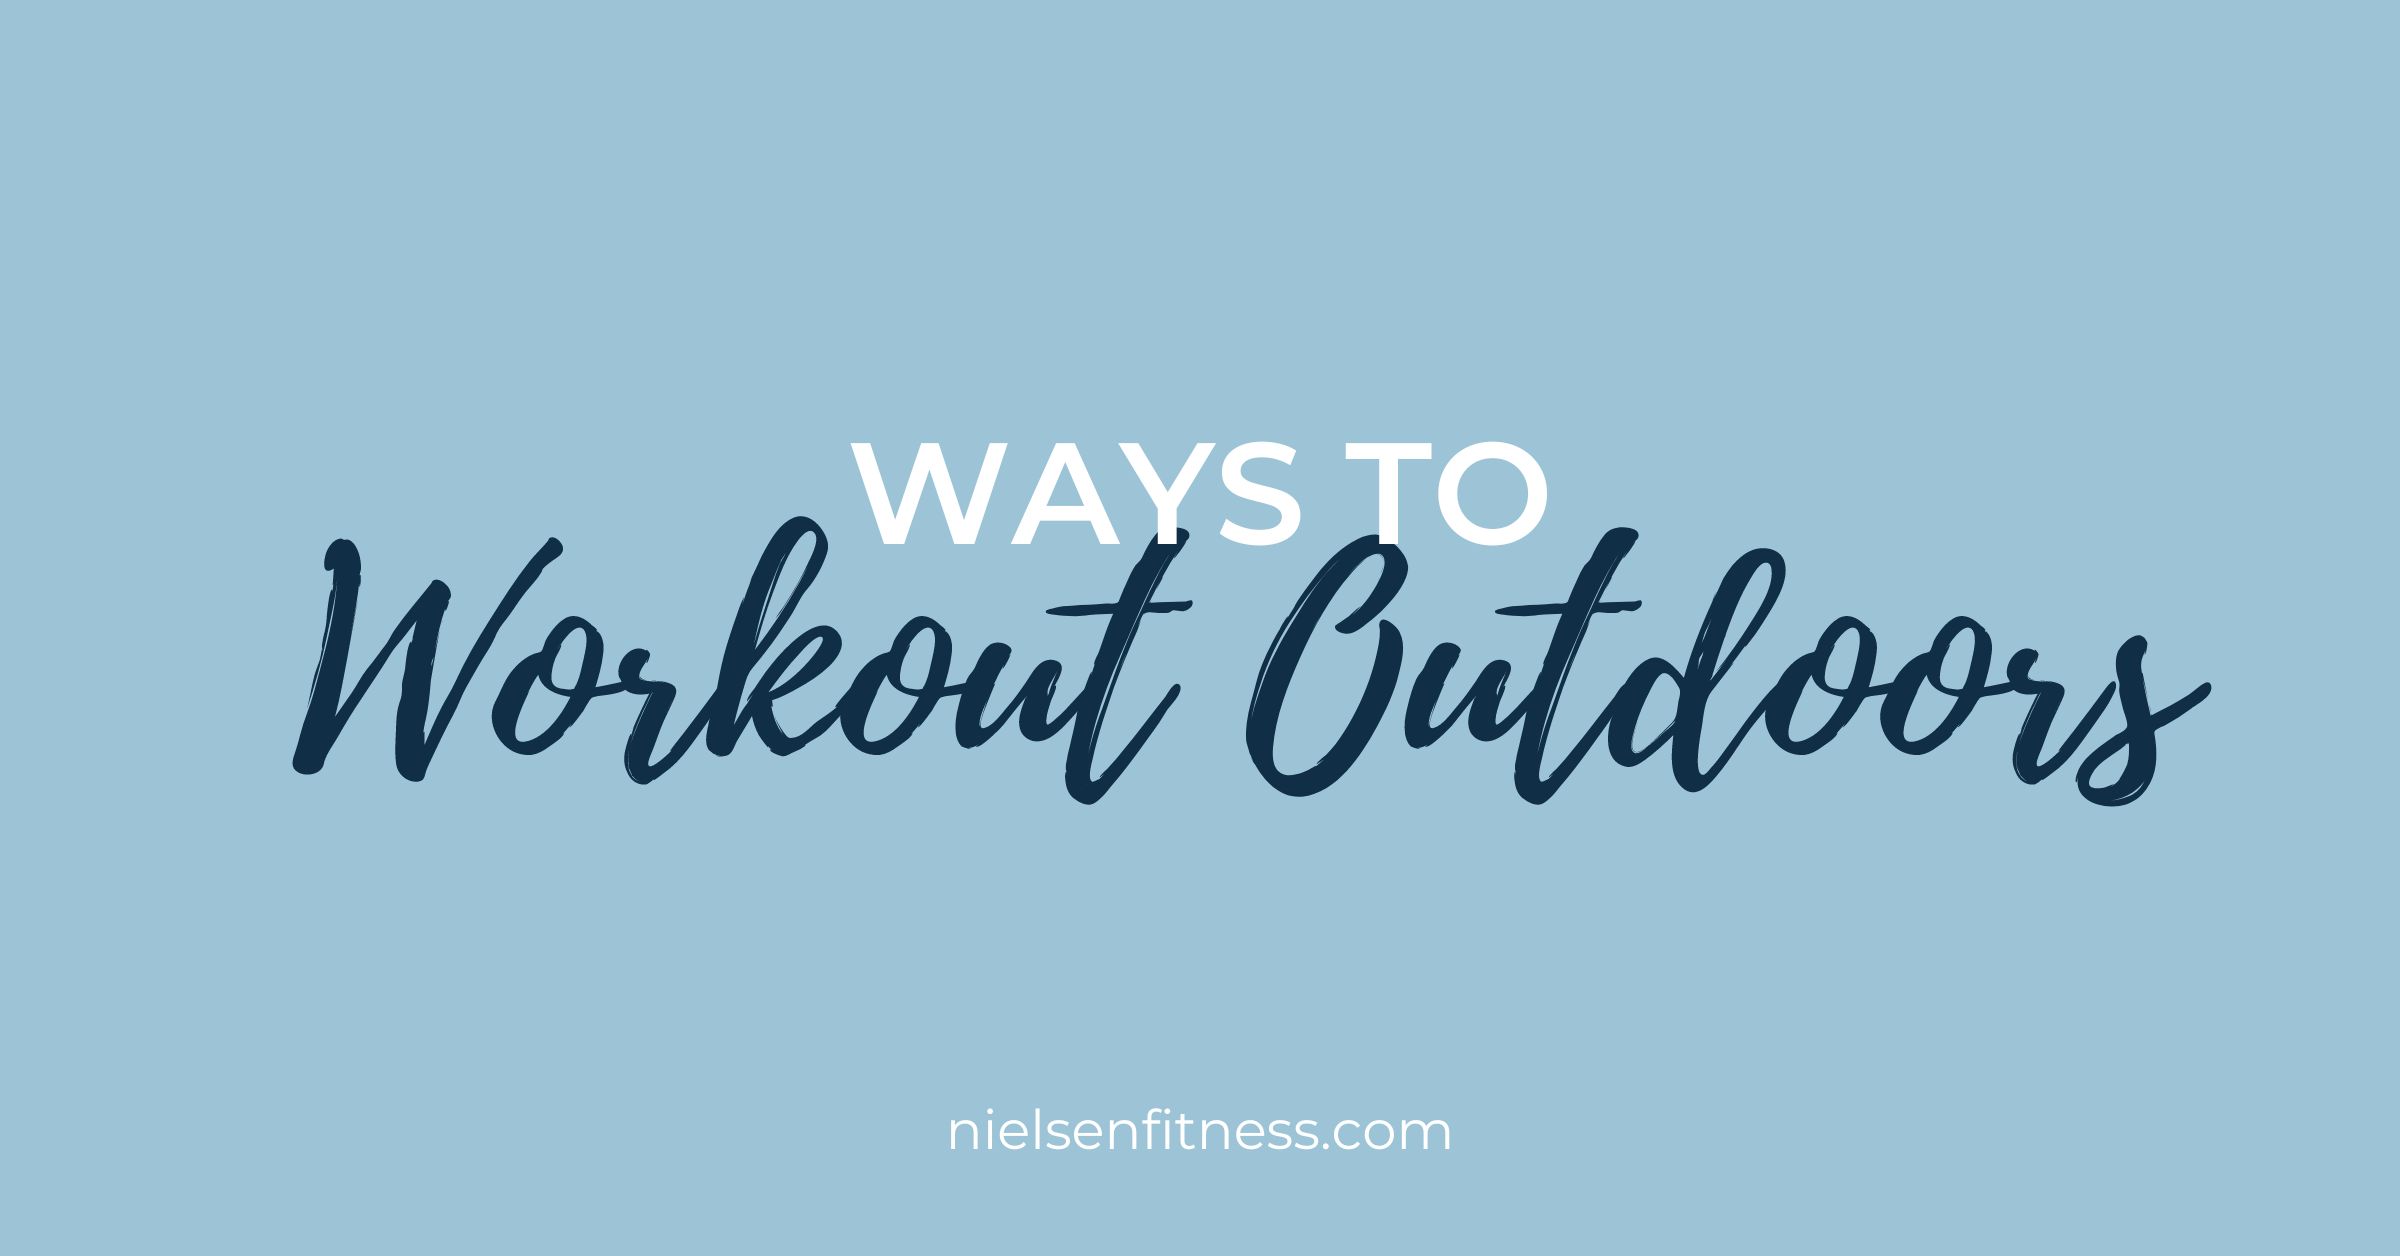 Ways to Workout Outdoors | Nielsen Fitness